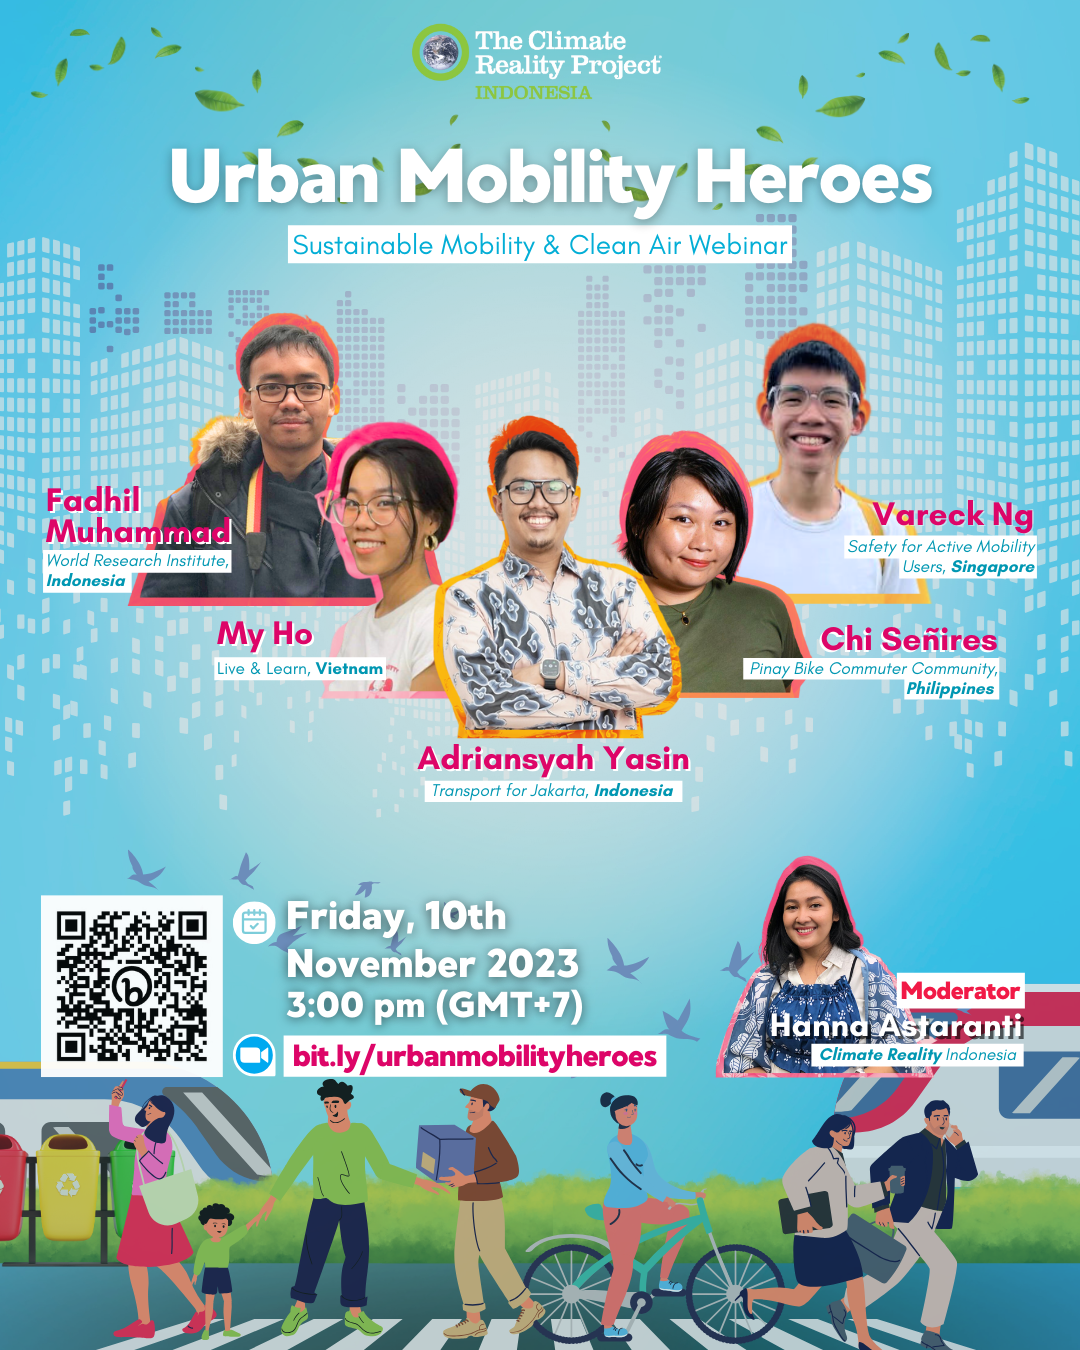 Poster for Urban Mobility Heroes: Sustainable Mobility & Clean Air Webinar organized by The Climate Reality Project Indonesia happening on Friday, 10th November 2023 at&10;3:00 pm (GMT+7). The panelist's photos, names, and affiliations are shown, from left to right: Fadhil Muhammad from World Resources Institute Indonesia, My Ho from Live & Learn, Vietnam, Adriansyah Yasin from Transport for Jakarta, Indonesia, Chi Señires from Pinay Bike Commuter Community, Philippines, and Vareck Ng from Safety for Active Mobility Users, Singapore. The discussion will be moderated by Hanna Astaranti from Climate Reality Indonesia.